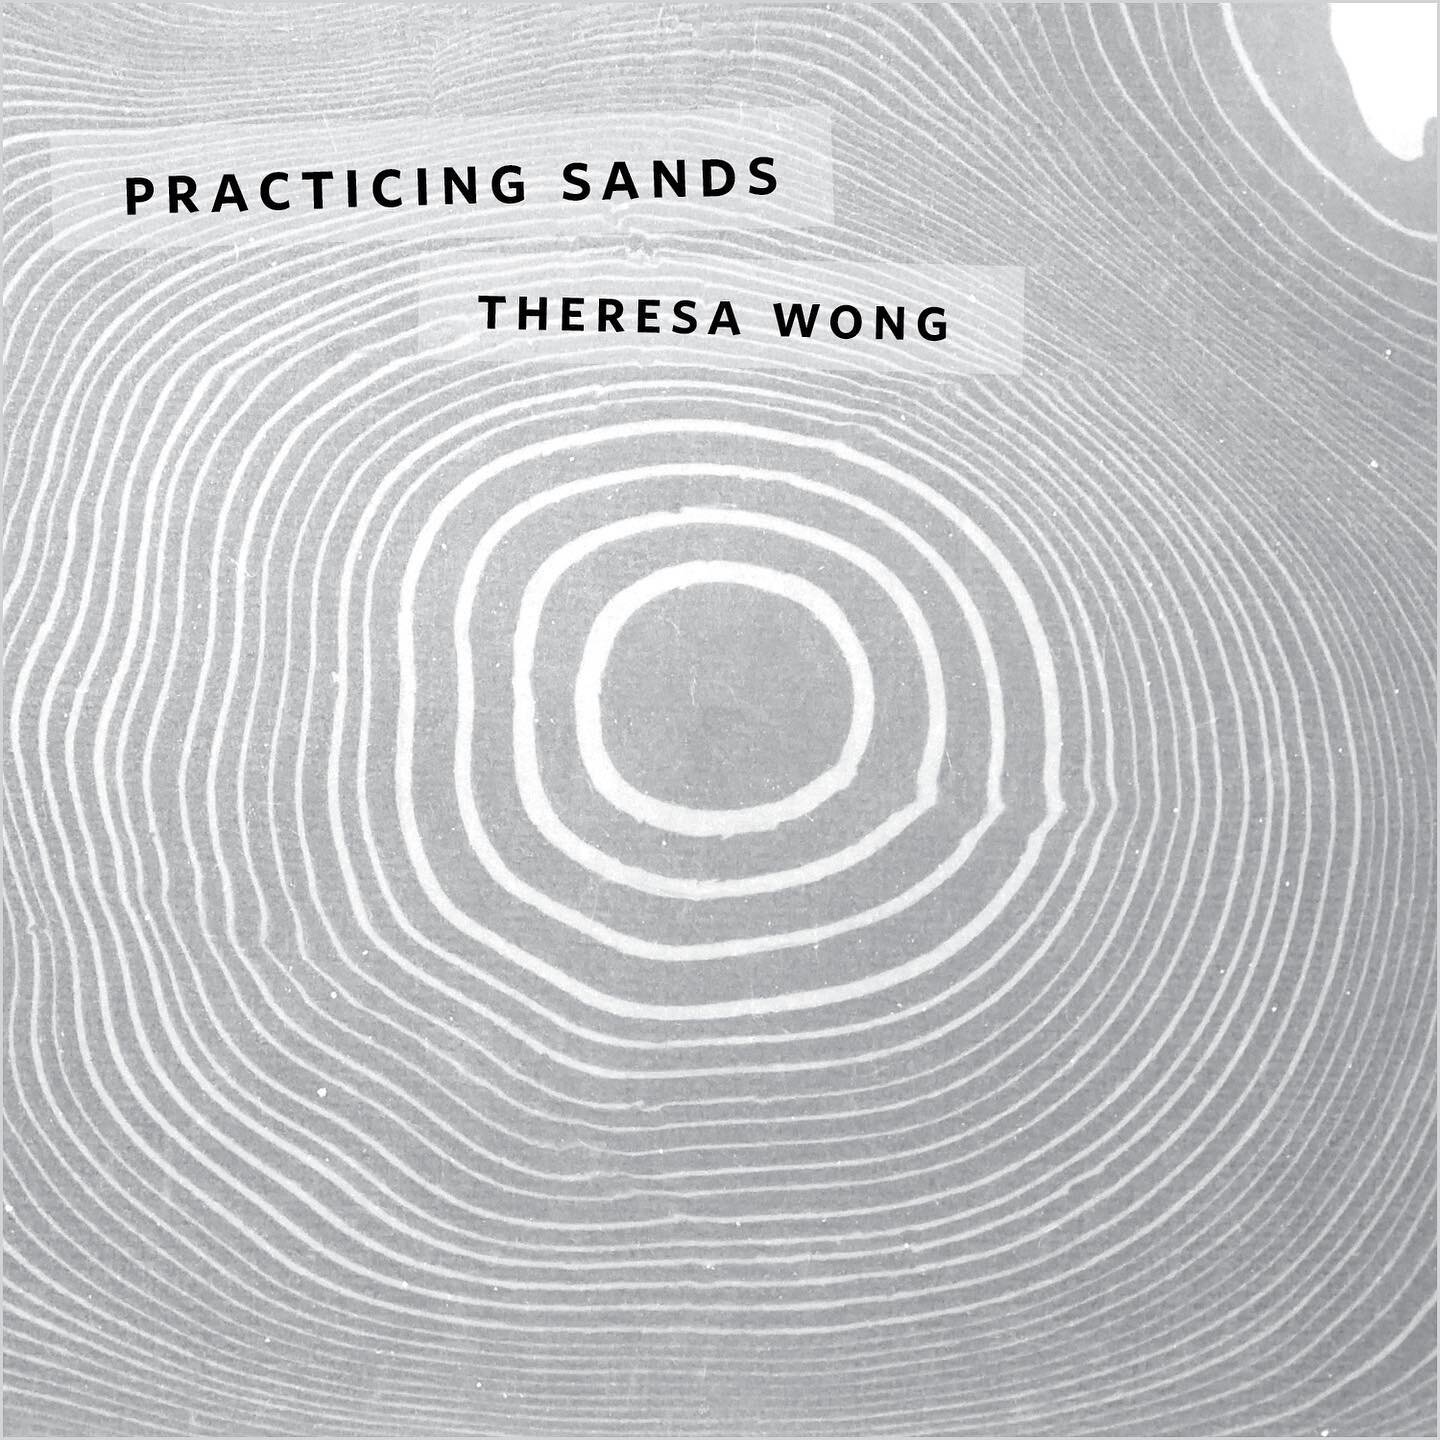 fo'c'sle is proud to announce the forthcoming release of Practicing Sands, a solo album for cello and voice by @tree_wong available now for preorder and officially out September 14th. Preorder at focslemusic.com